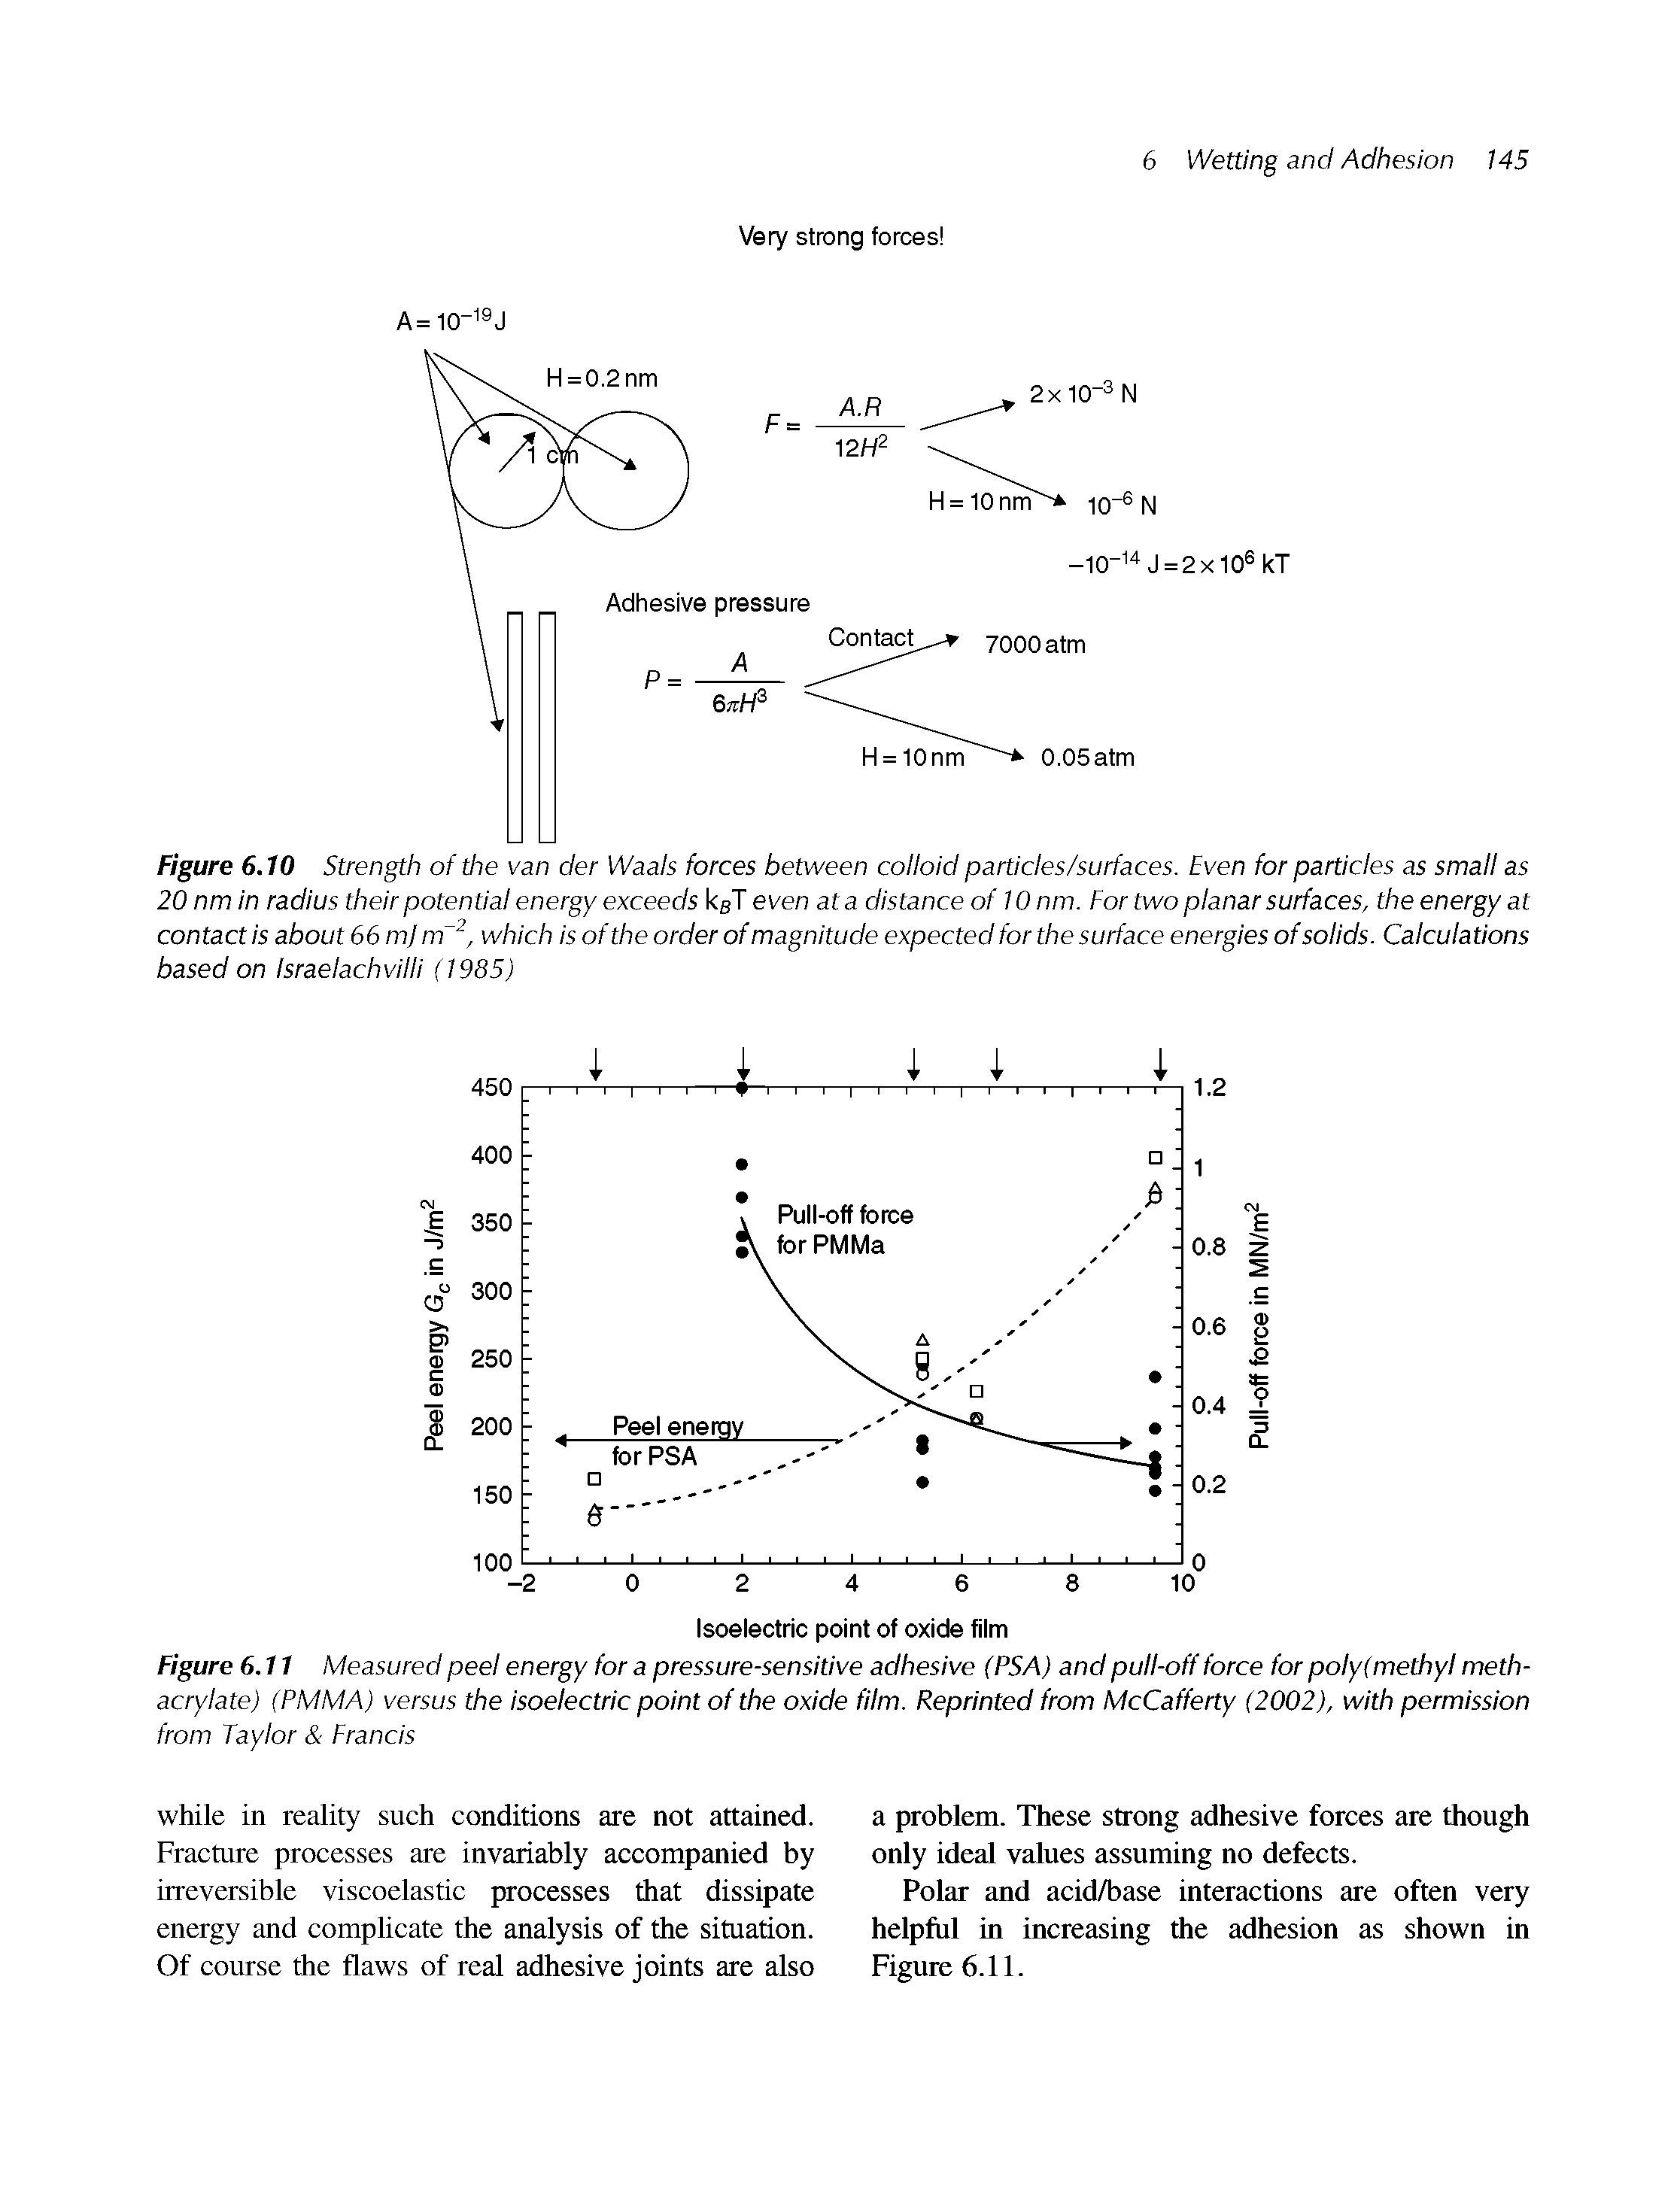 Figure 6.11 Measured peel energy for a pressure-sensitive adhesive (PSA) and pull-off force for poly (methyl methacrylate) (PMMA) versus the isoelectric point of the oxide film. Reprinted from McCafferty (2002), with permission...